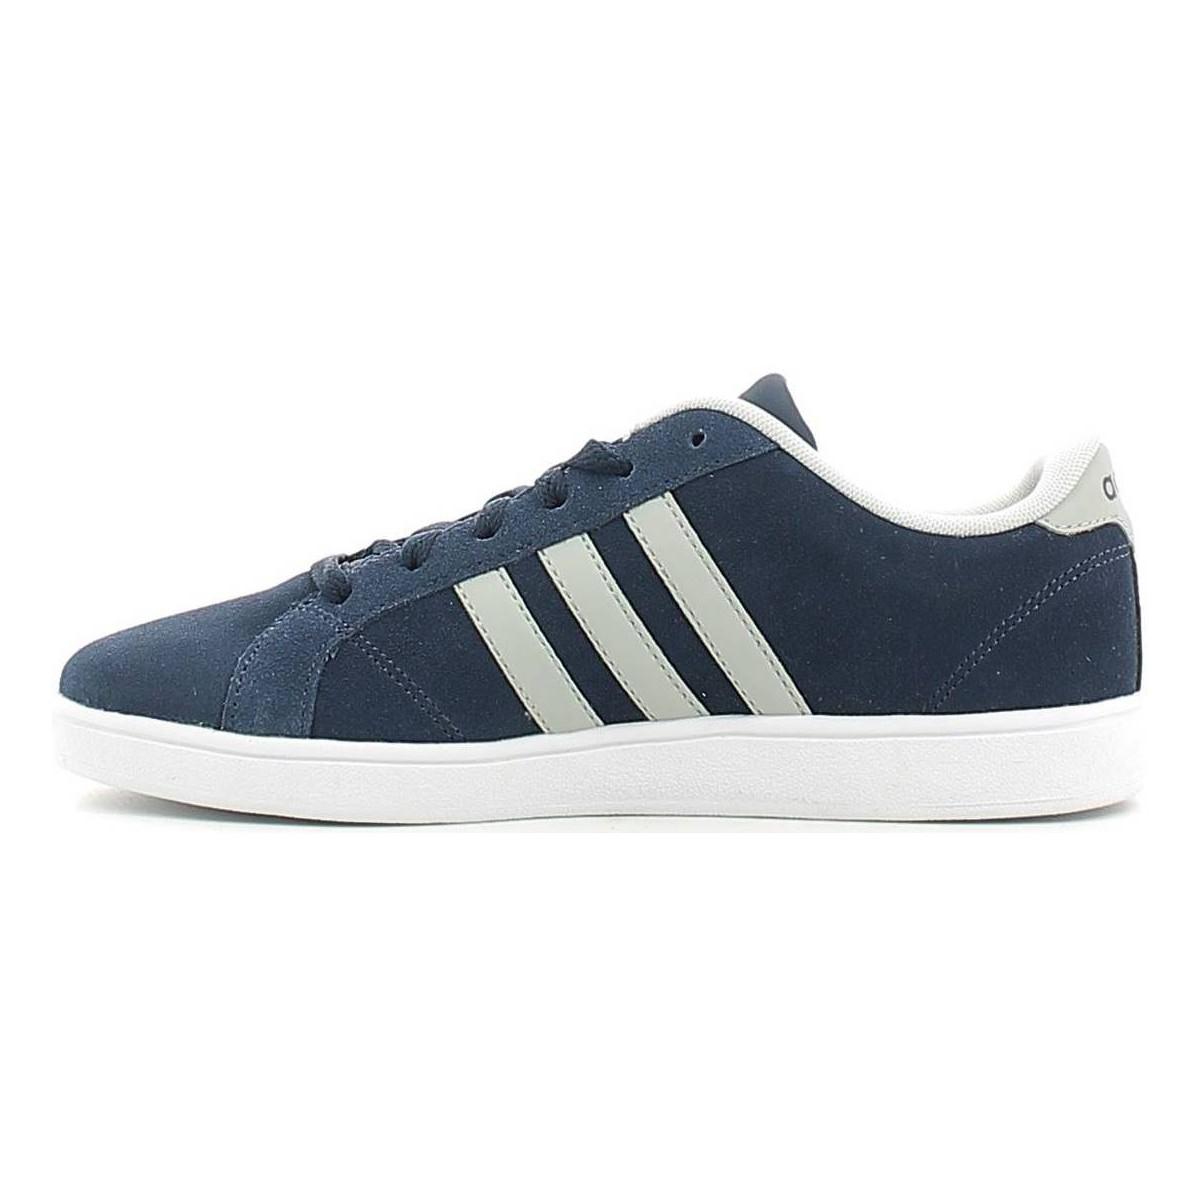 adidas Aw4826 Sport Shoes Women Navy Women's Trainers In Blue - Lyst